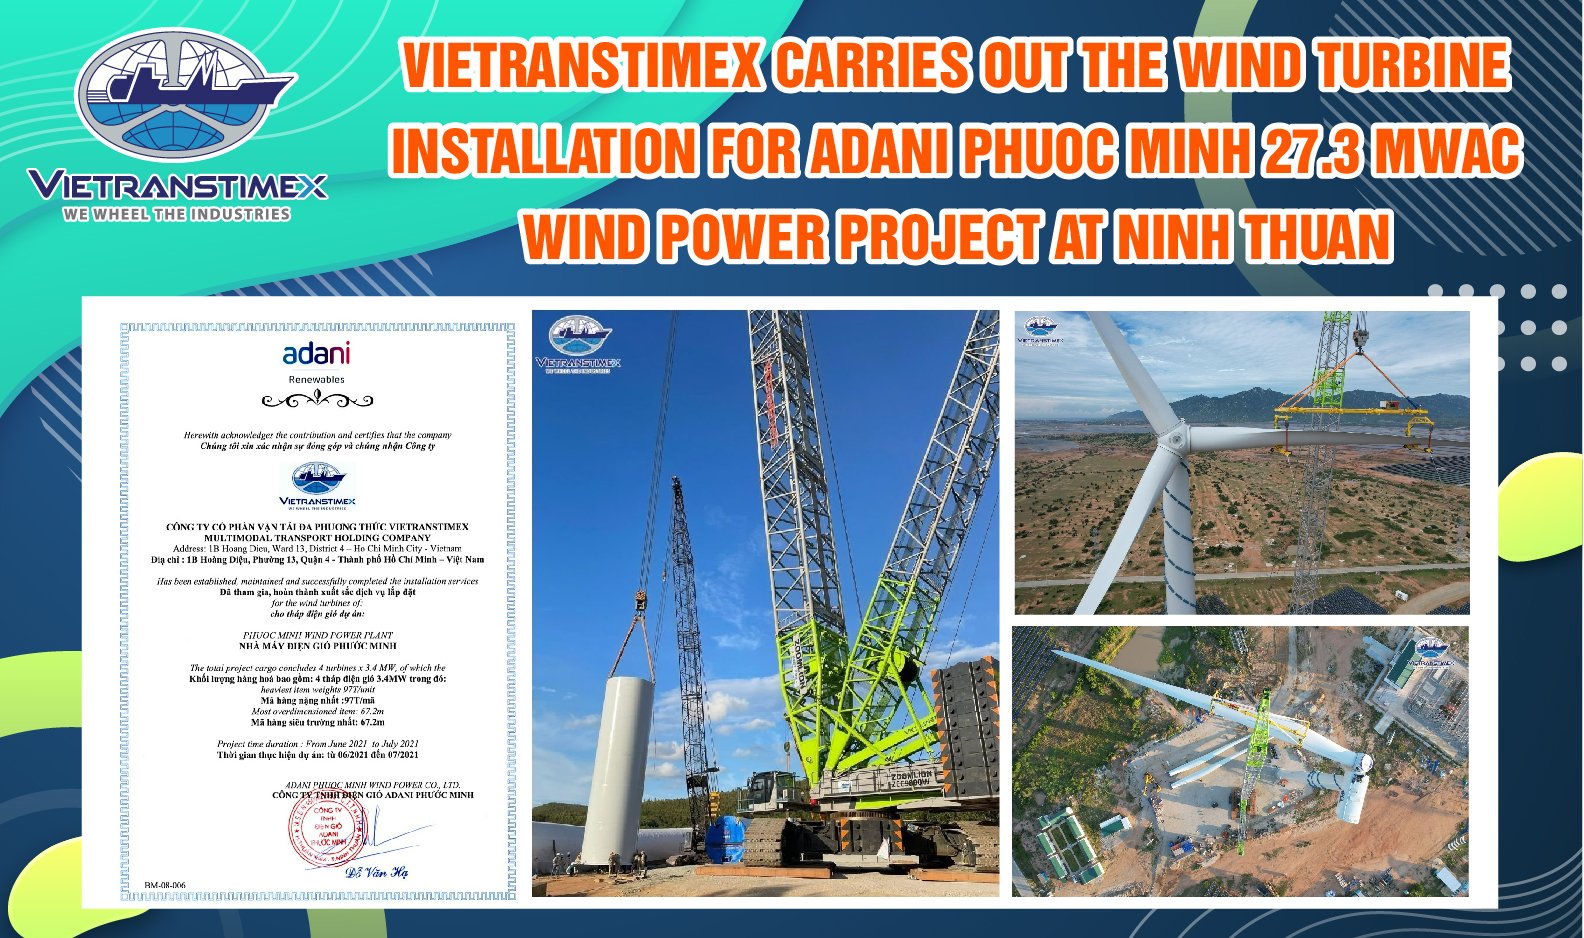 Vietranstimex Carries Out The Wind Turbine Installation For Adani Phuoc Minh Wind Power Project At Ninh Thuan